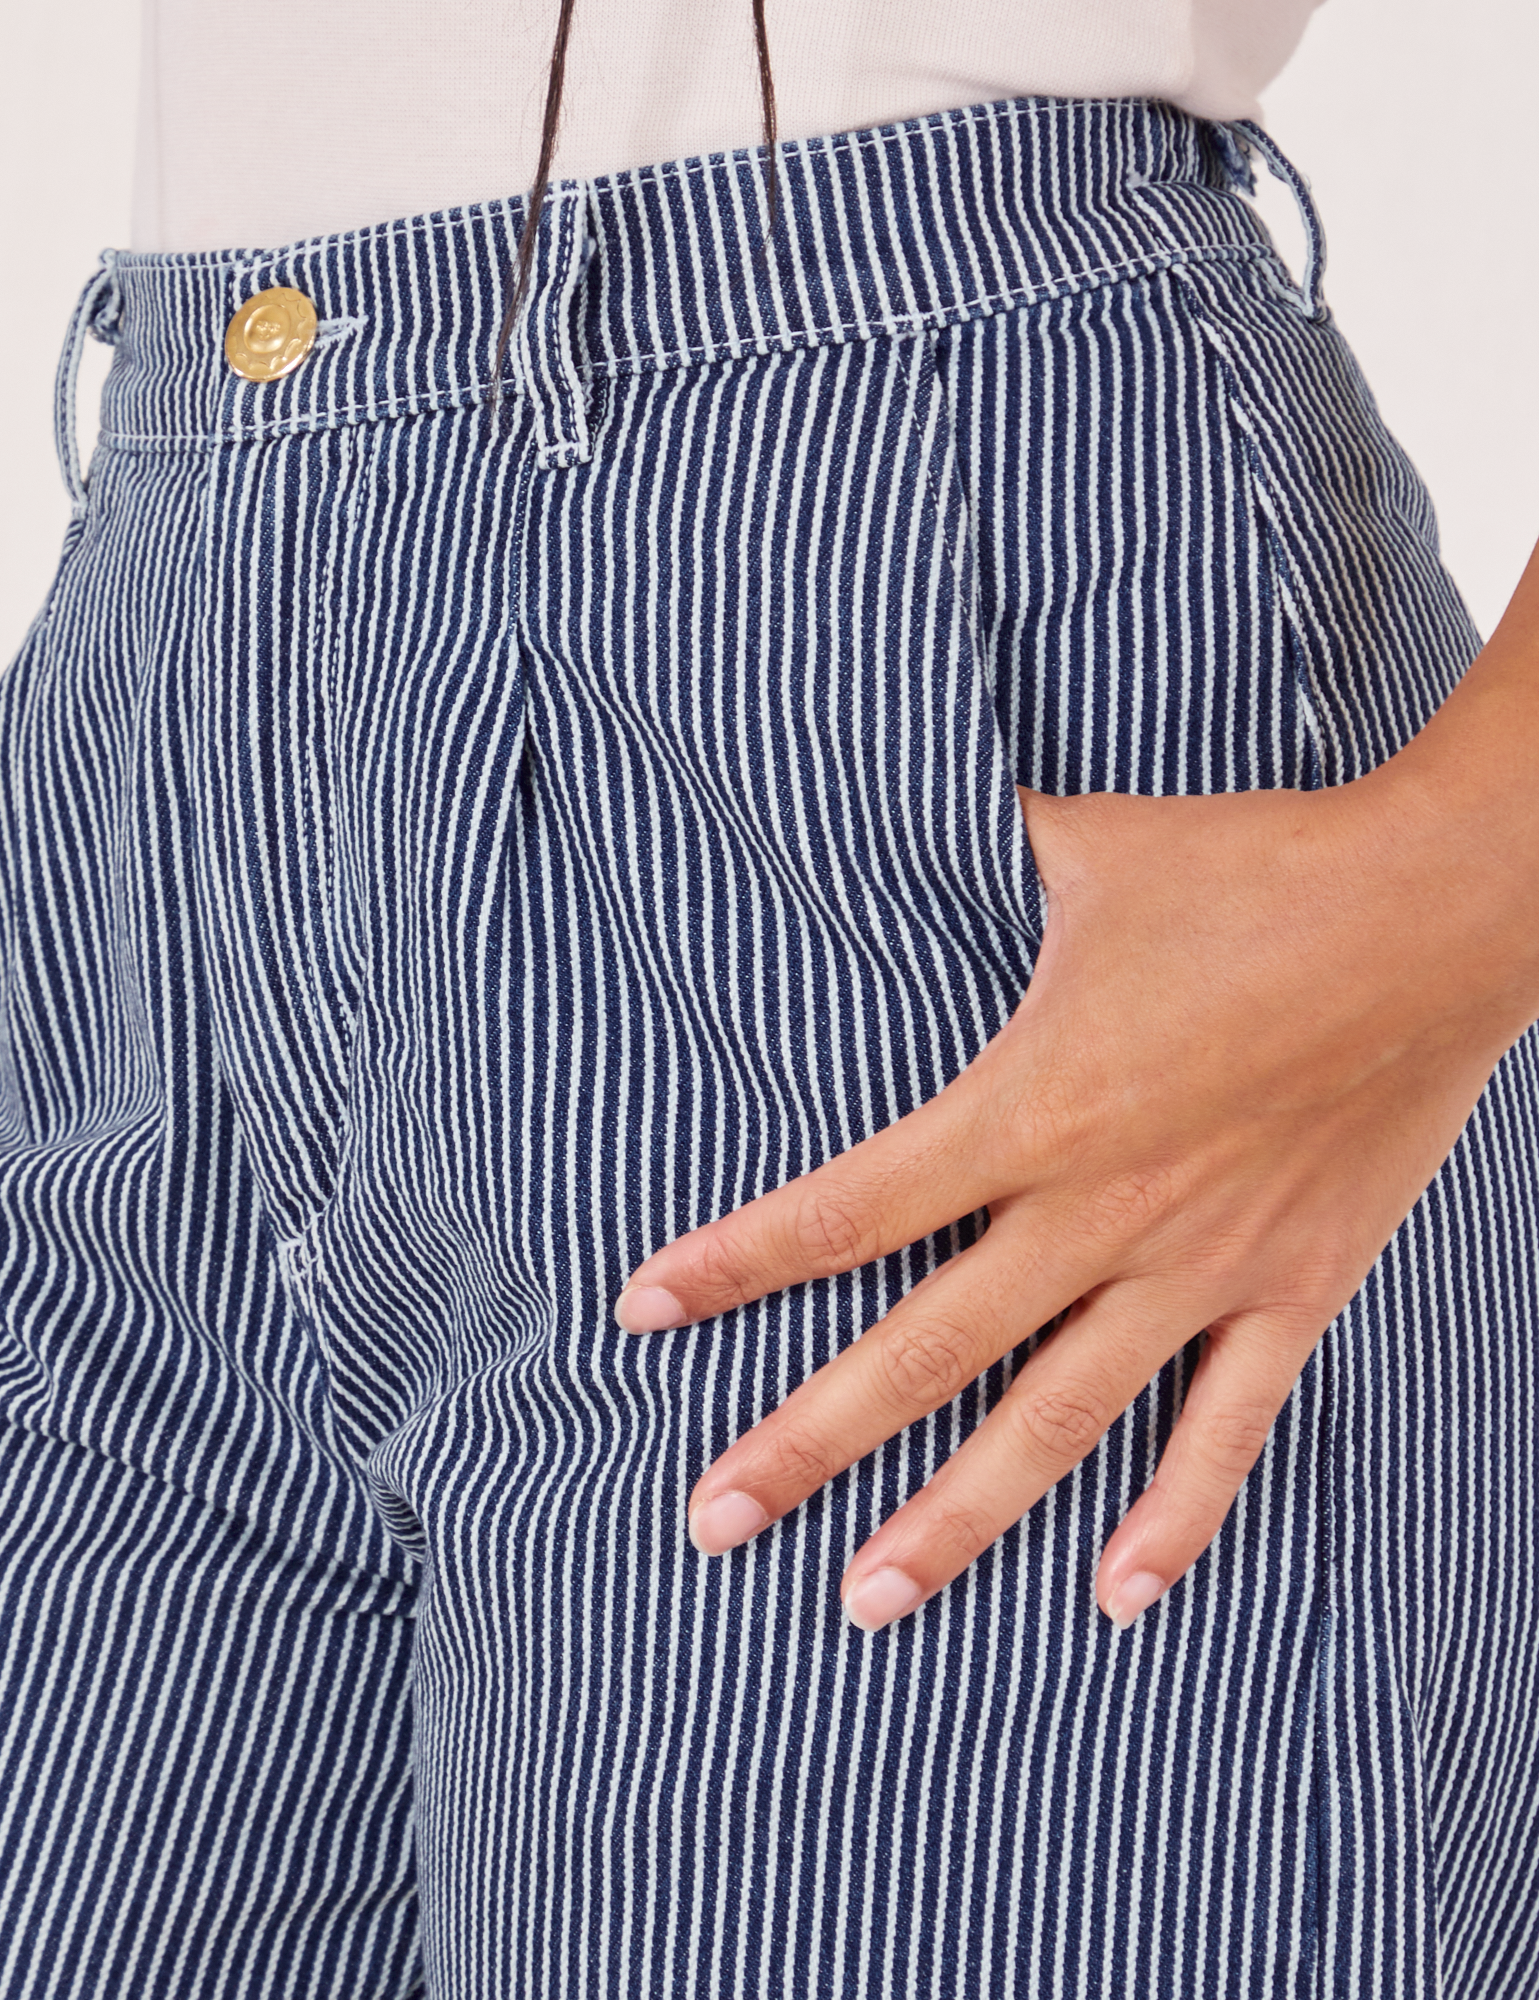 Front pocket close up of Denim Trouser Jeans in Railroad Stripe. Gabi has her hand in the pocket.